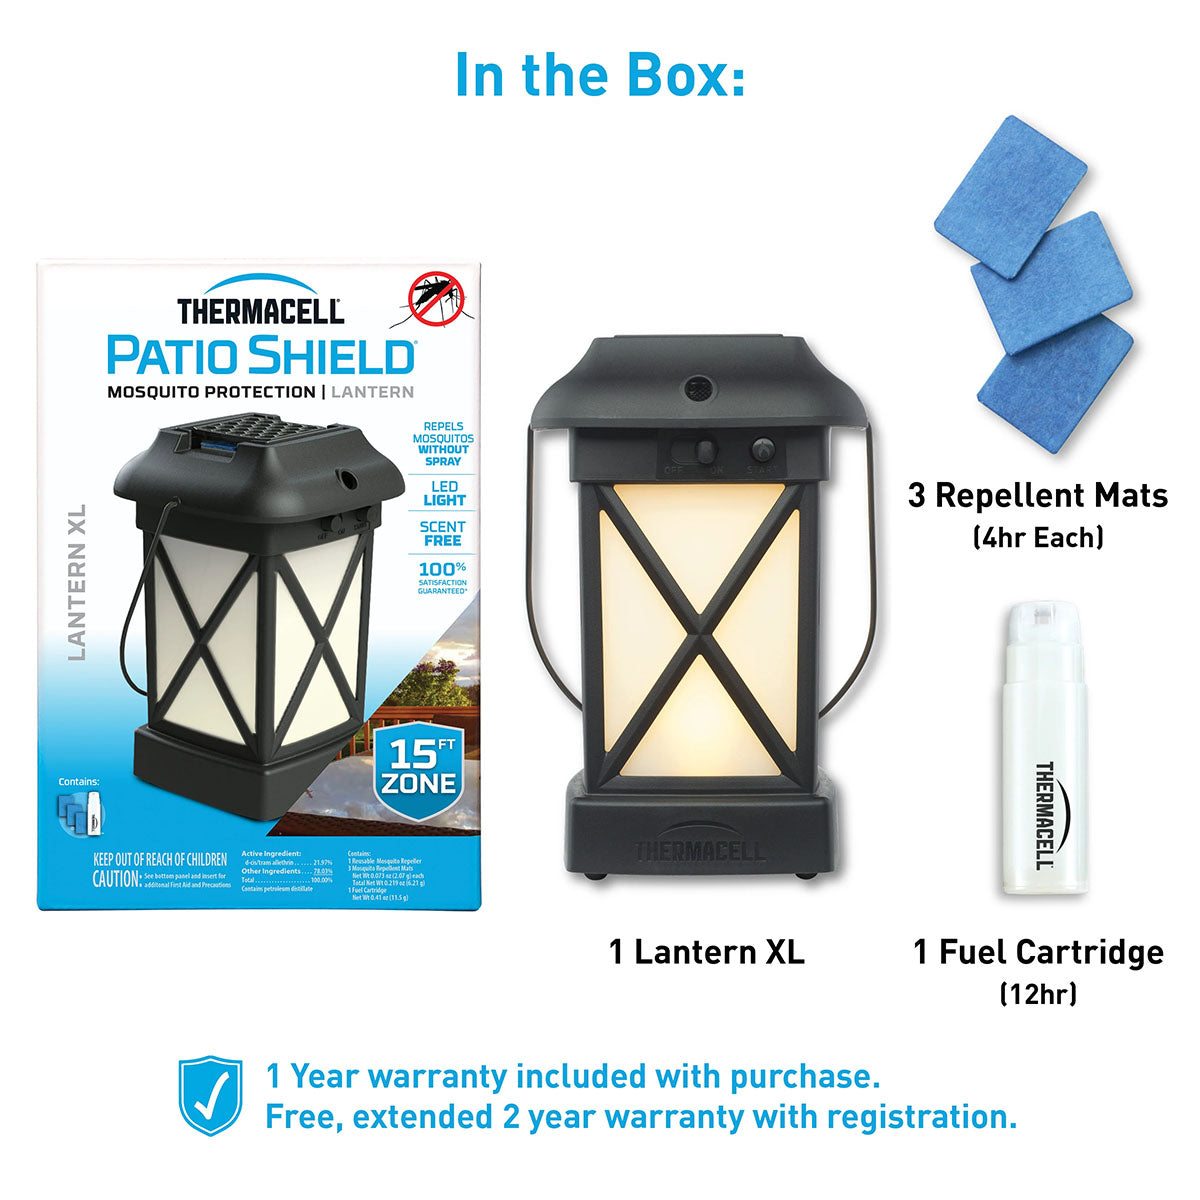 Thermacell Mosquito Repellent Lantern XL Thermacell Indigo Pool Patio BBQ